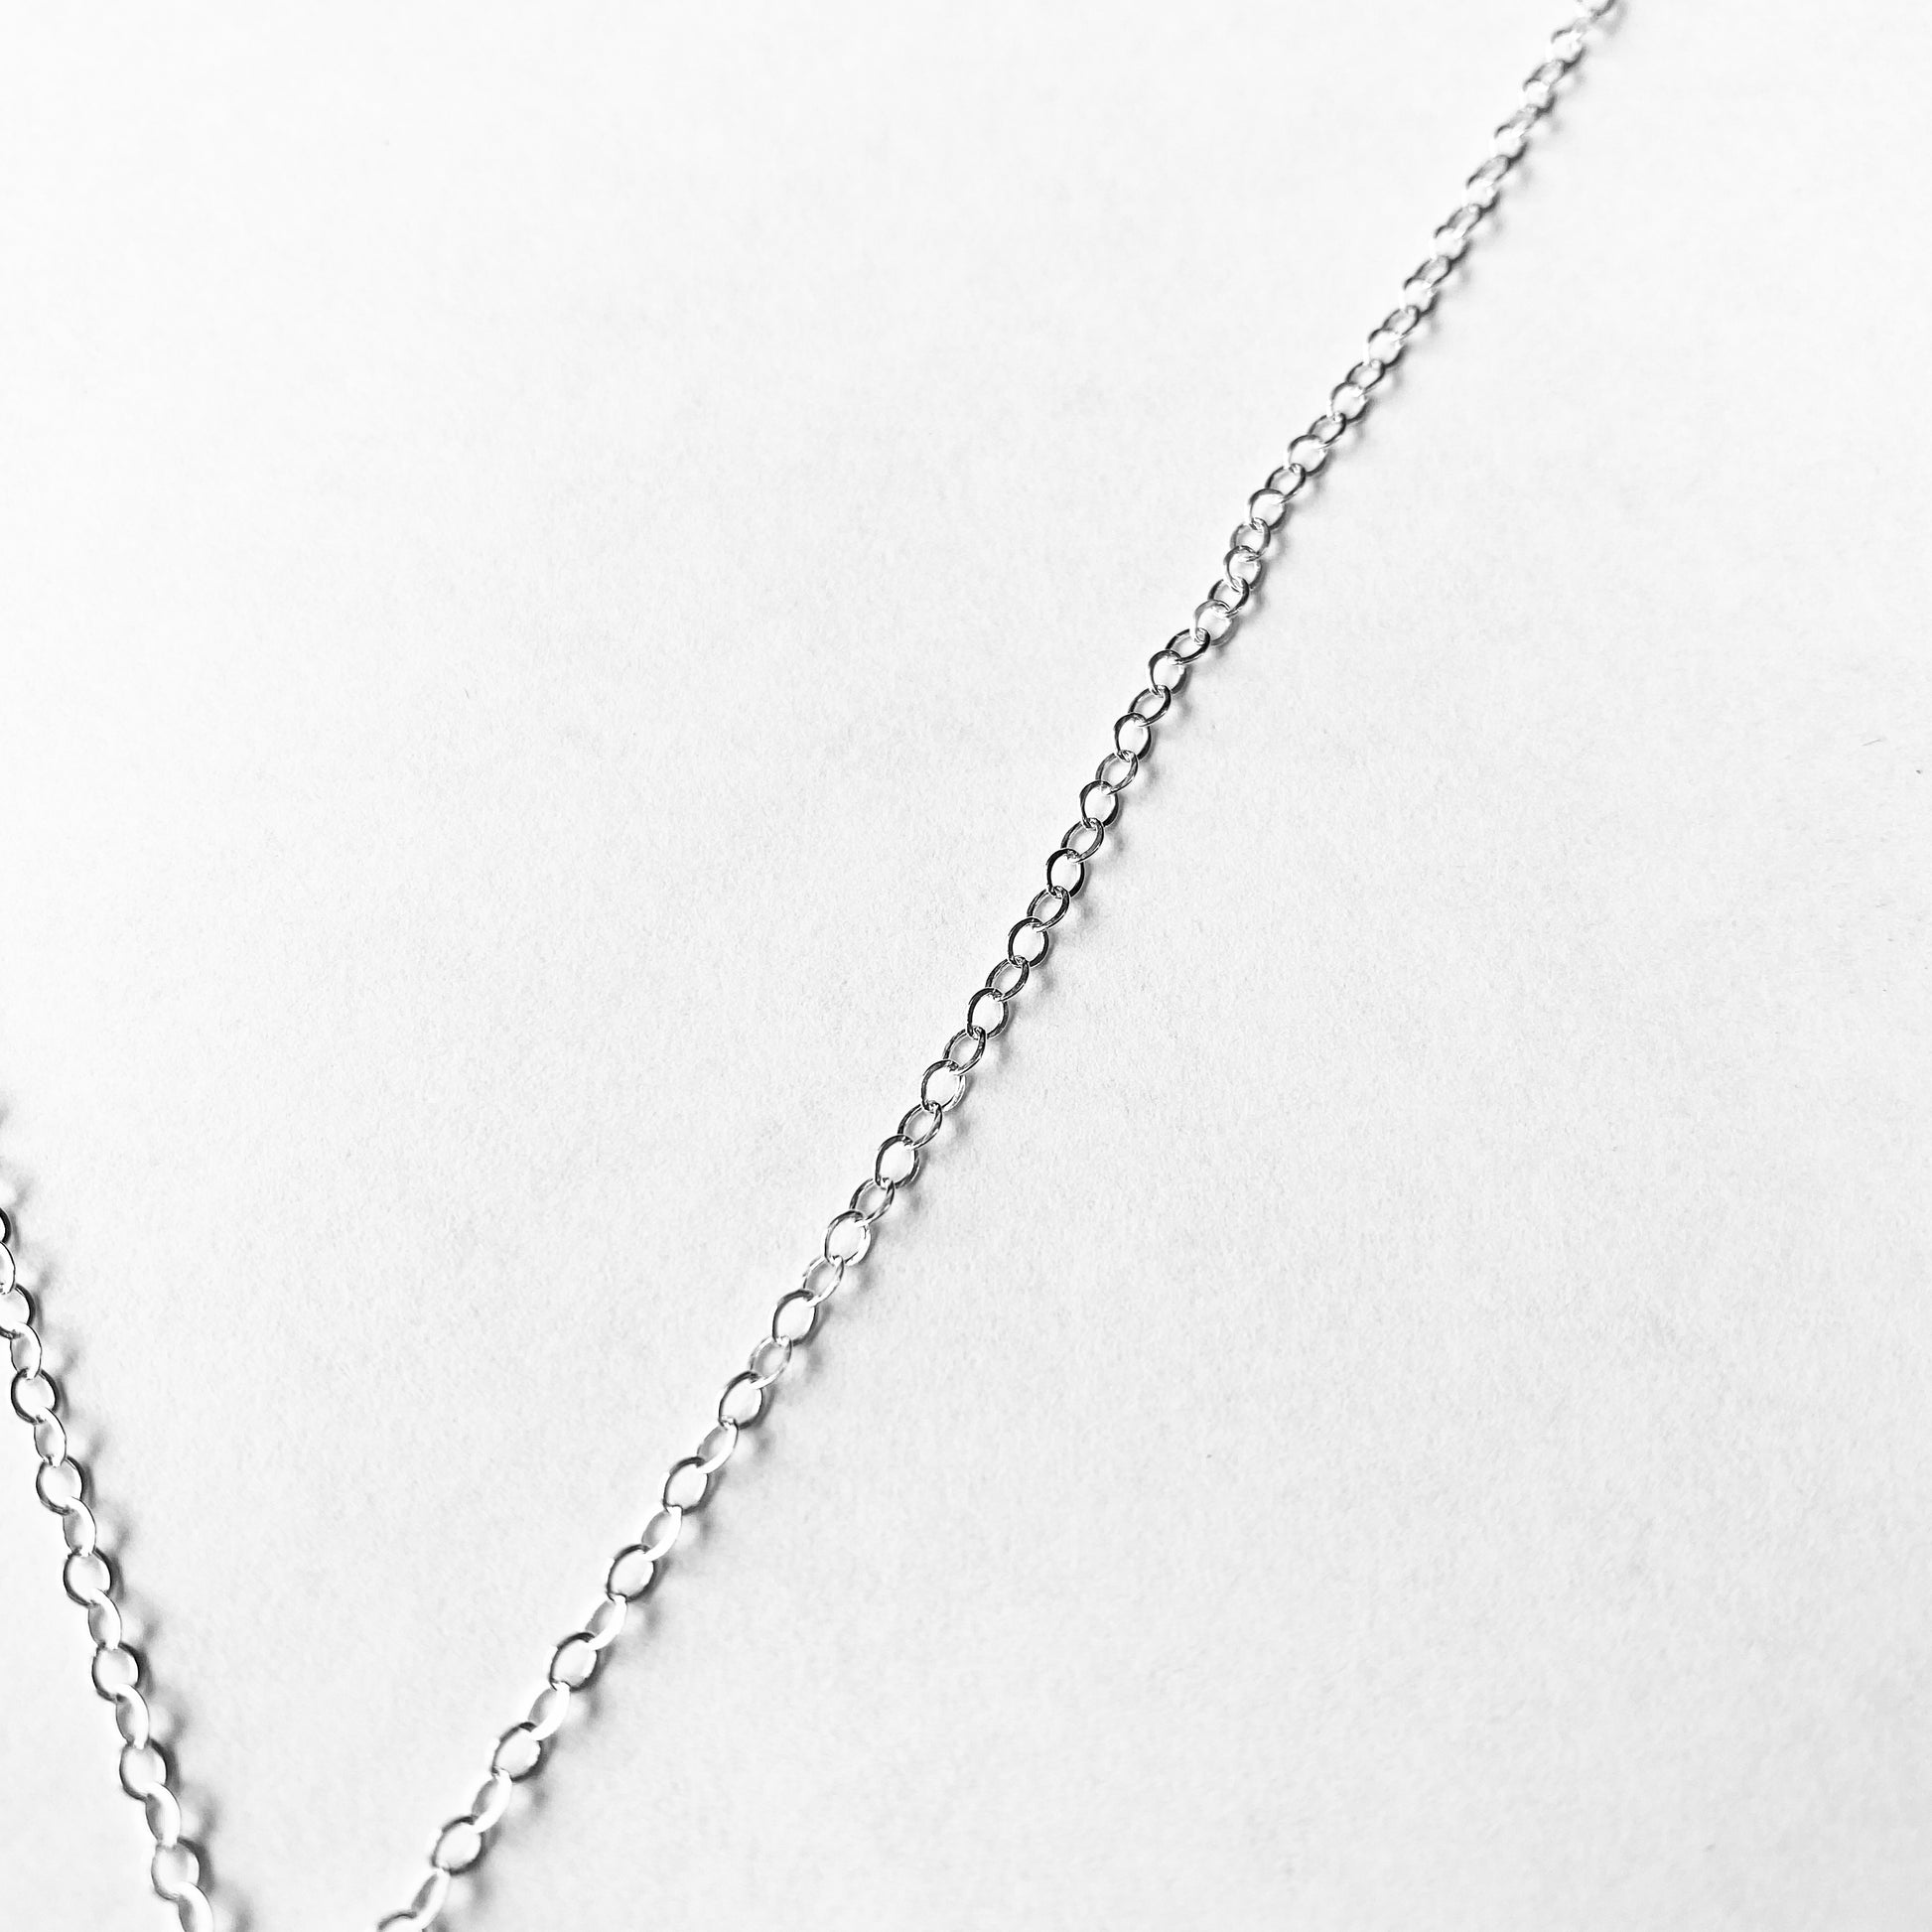 Shiny Star Sterling Silver Necklace chain by SOMMERSPARKLE